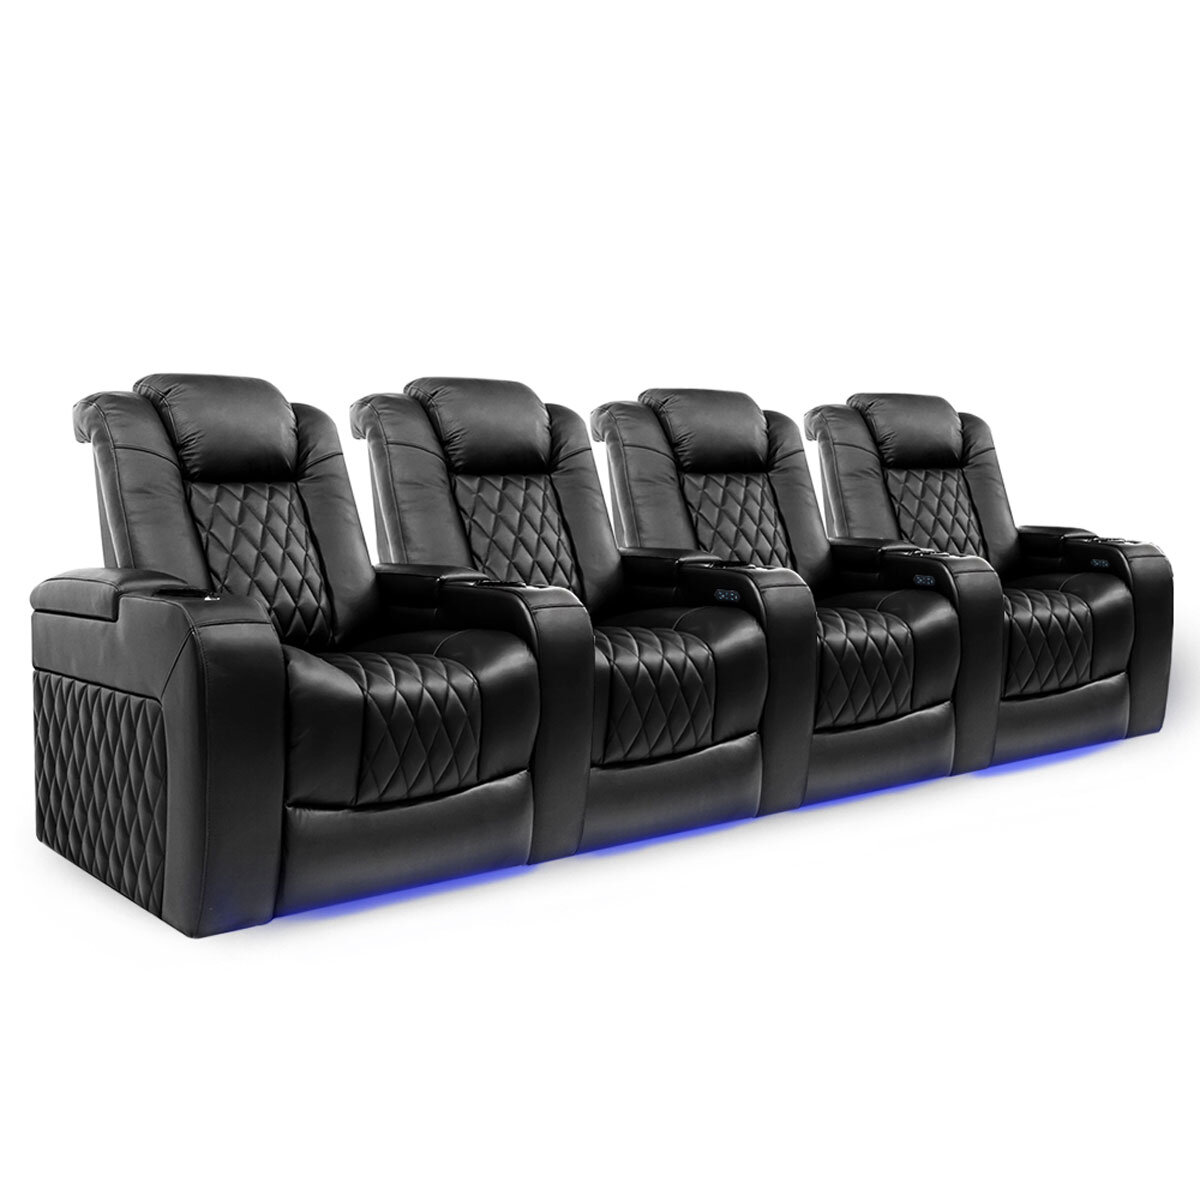 Valencia Home Theatre Seating Tuscany Row of 4 Chairs, Black